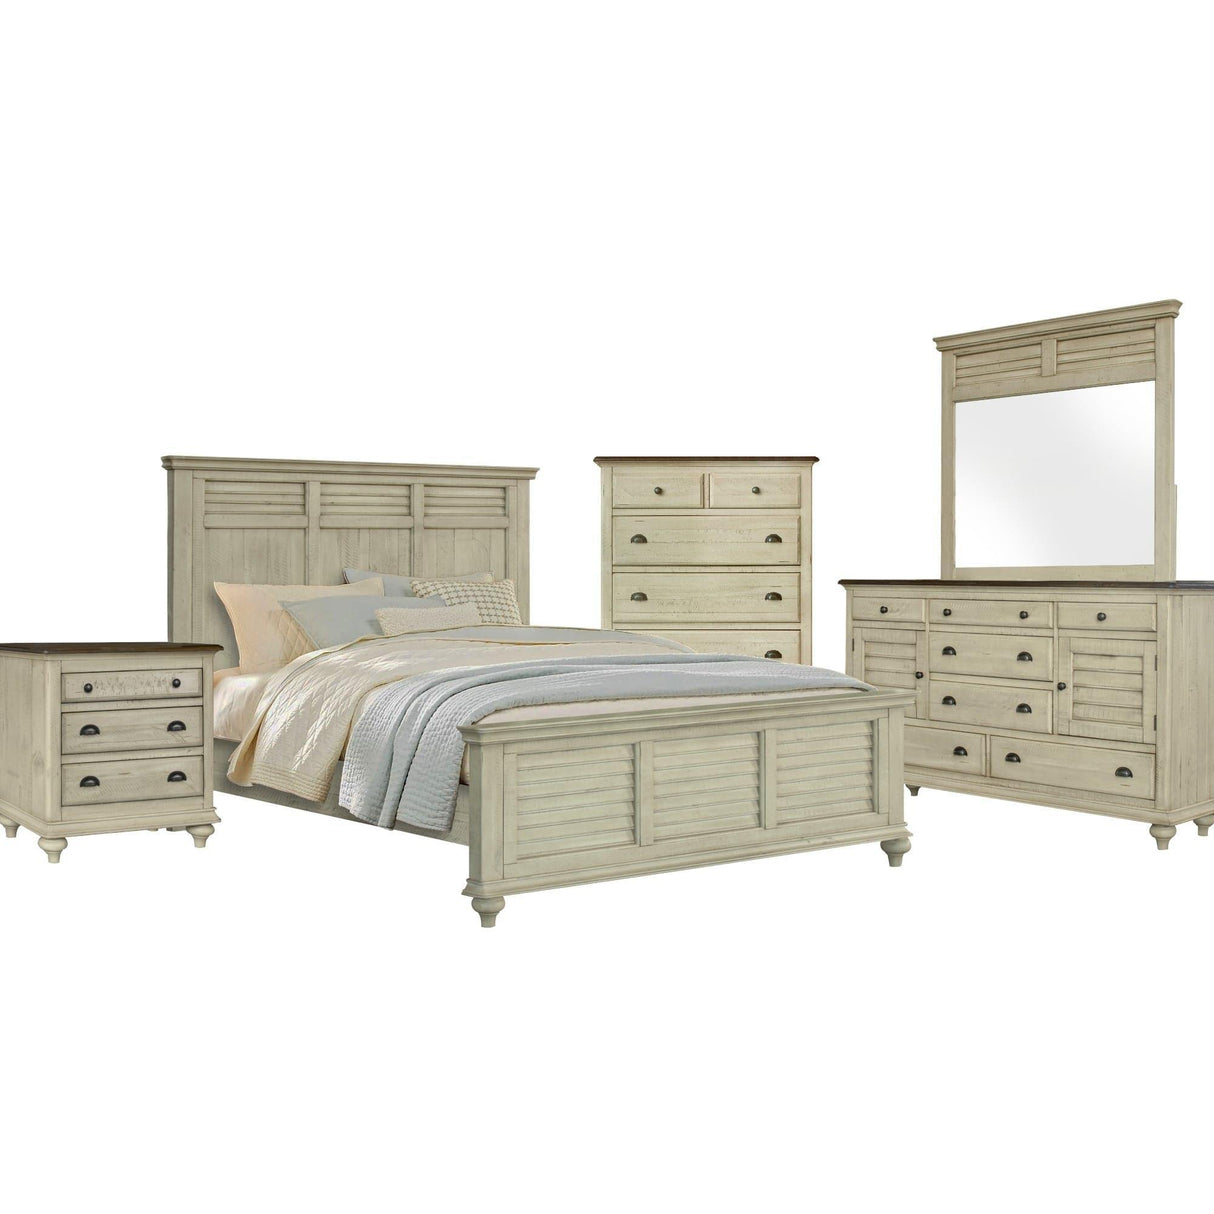 Sunset Trading Shades of Sand 5 Piece Queen Bedroom Set | Cream/Walnut Brown Solid Wood CF-2301-0489-Q-5PC - Bedroom Depot USA